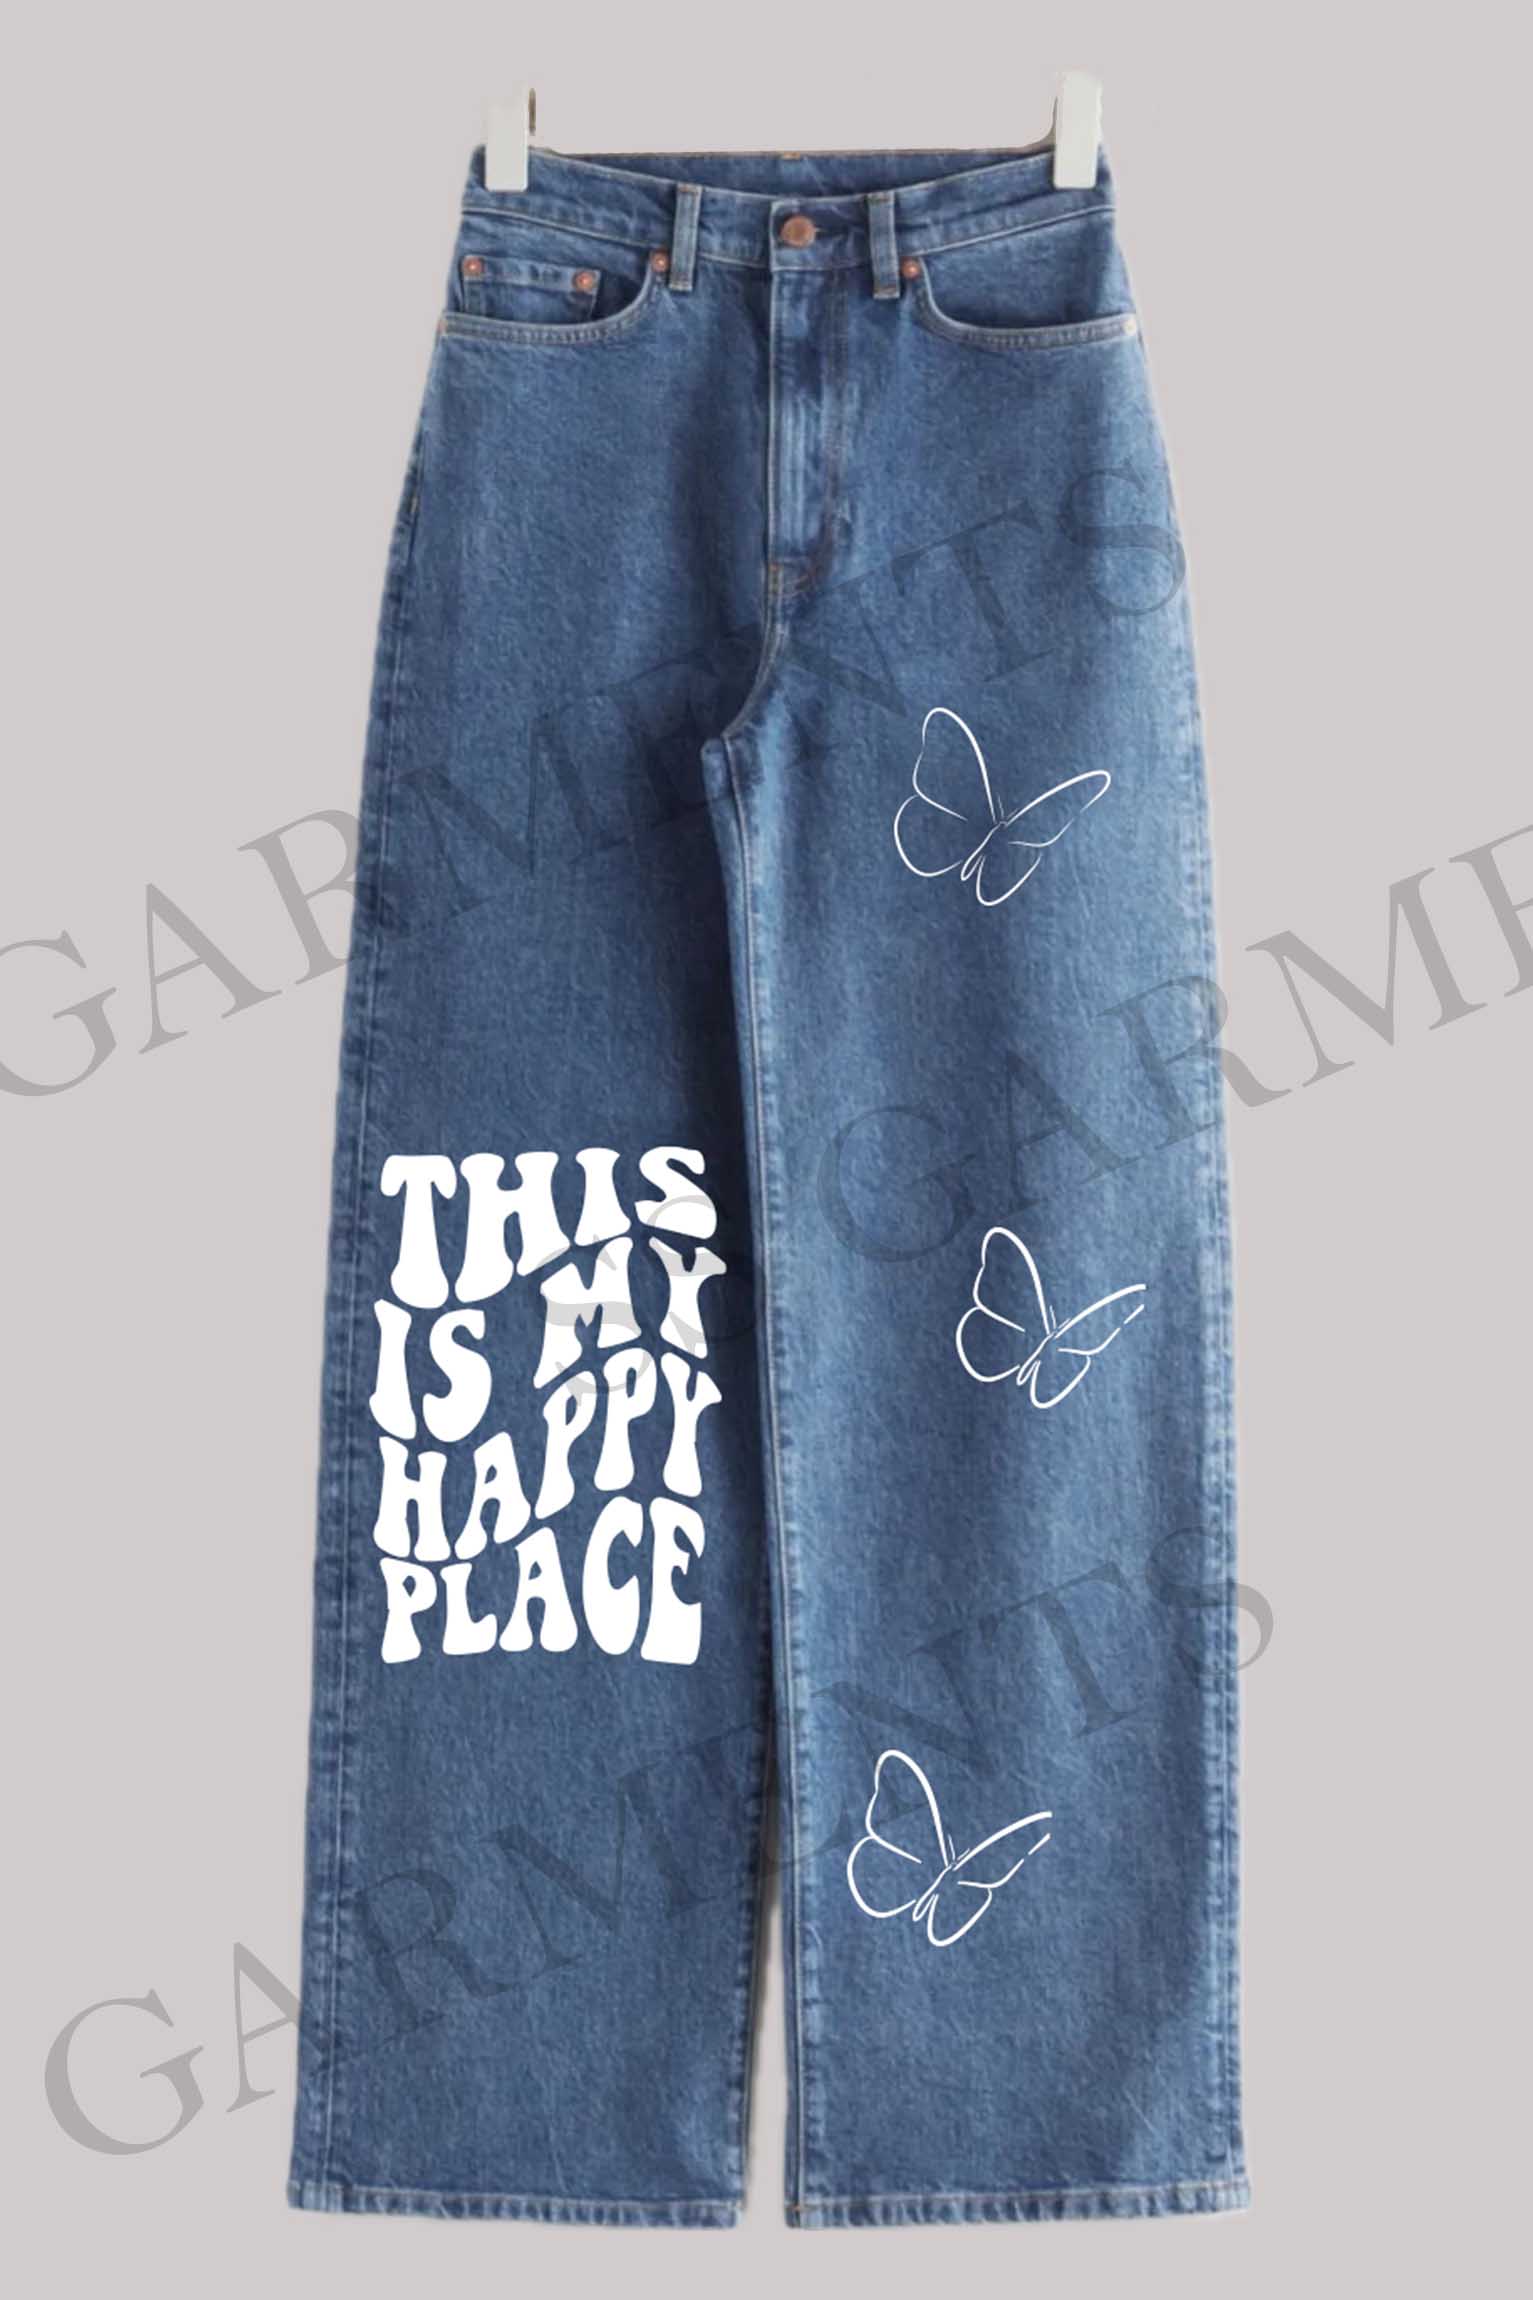 Happy place printed denim jeans for women